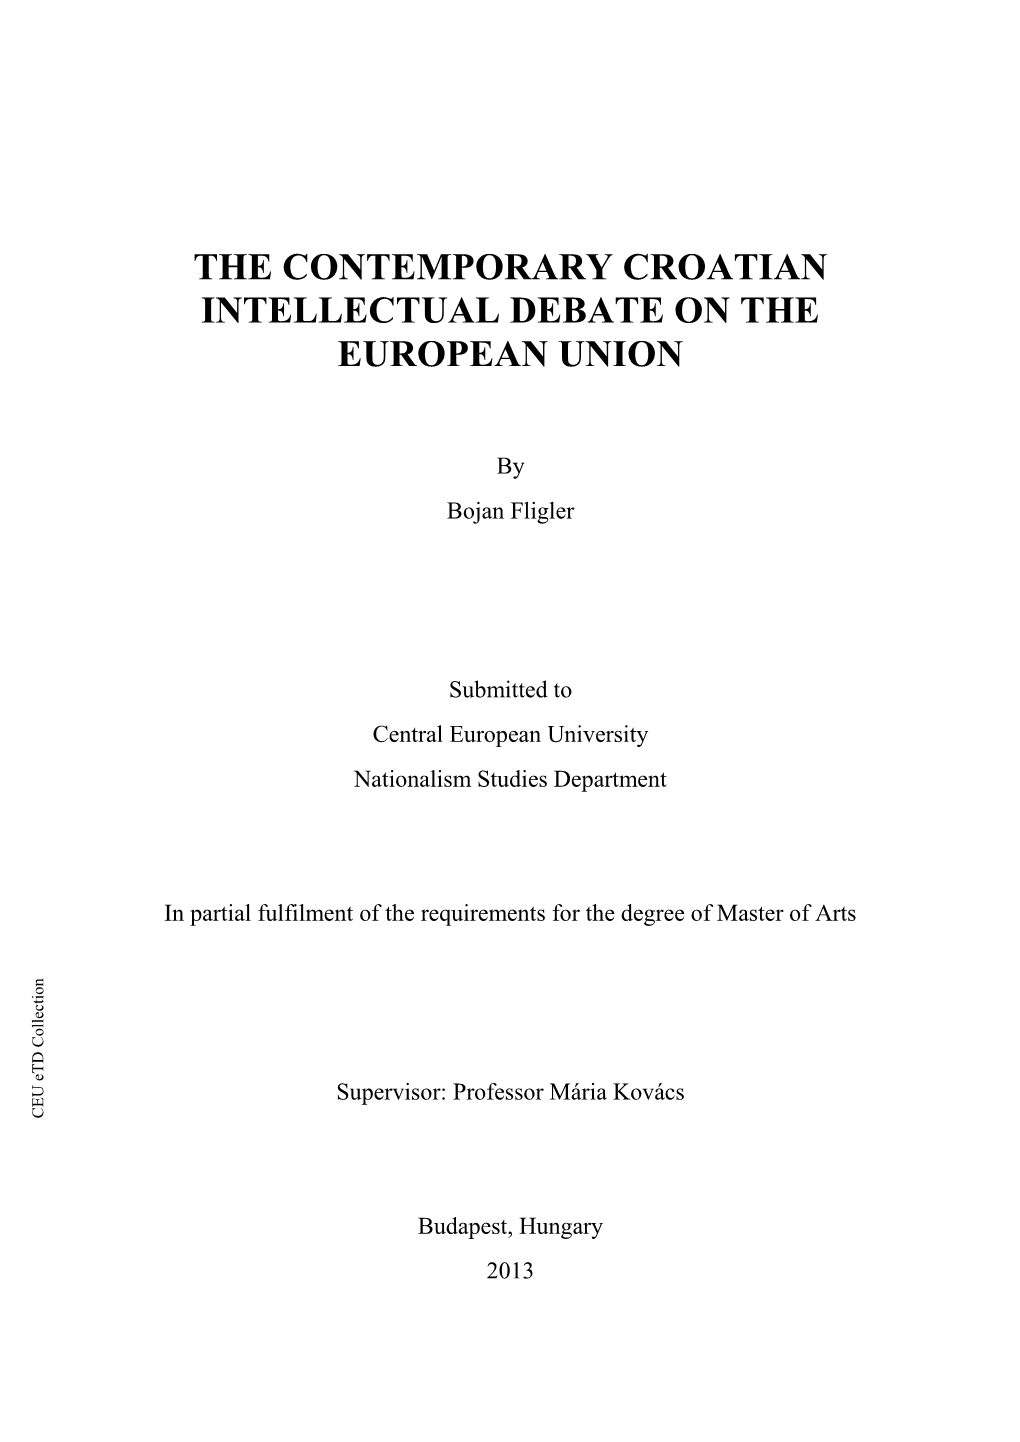 The Contemporary Croatian Intellectual Debate on The